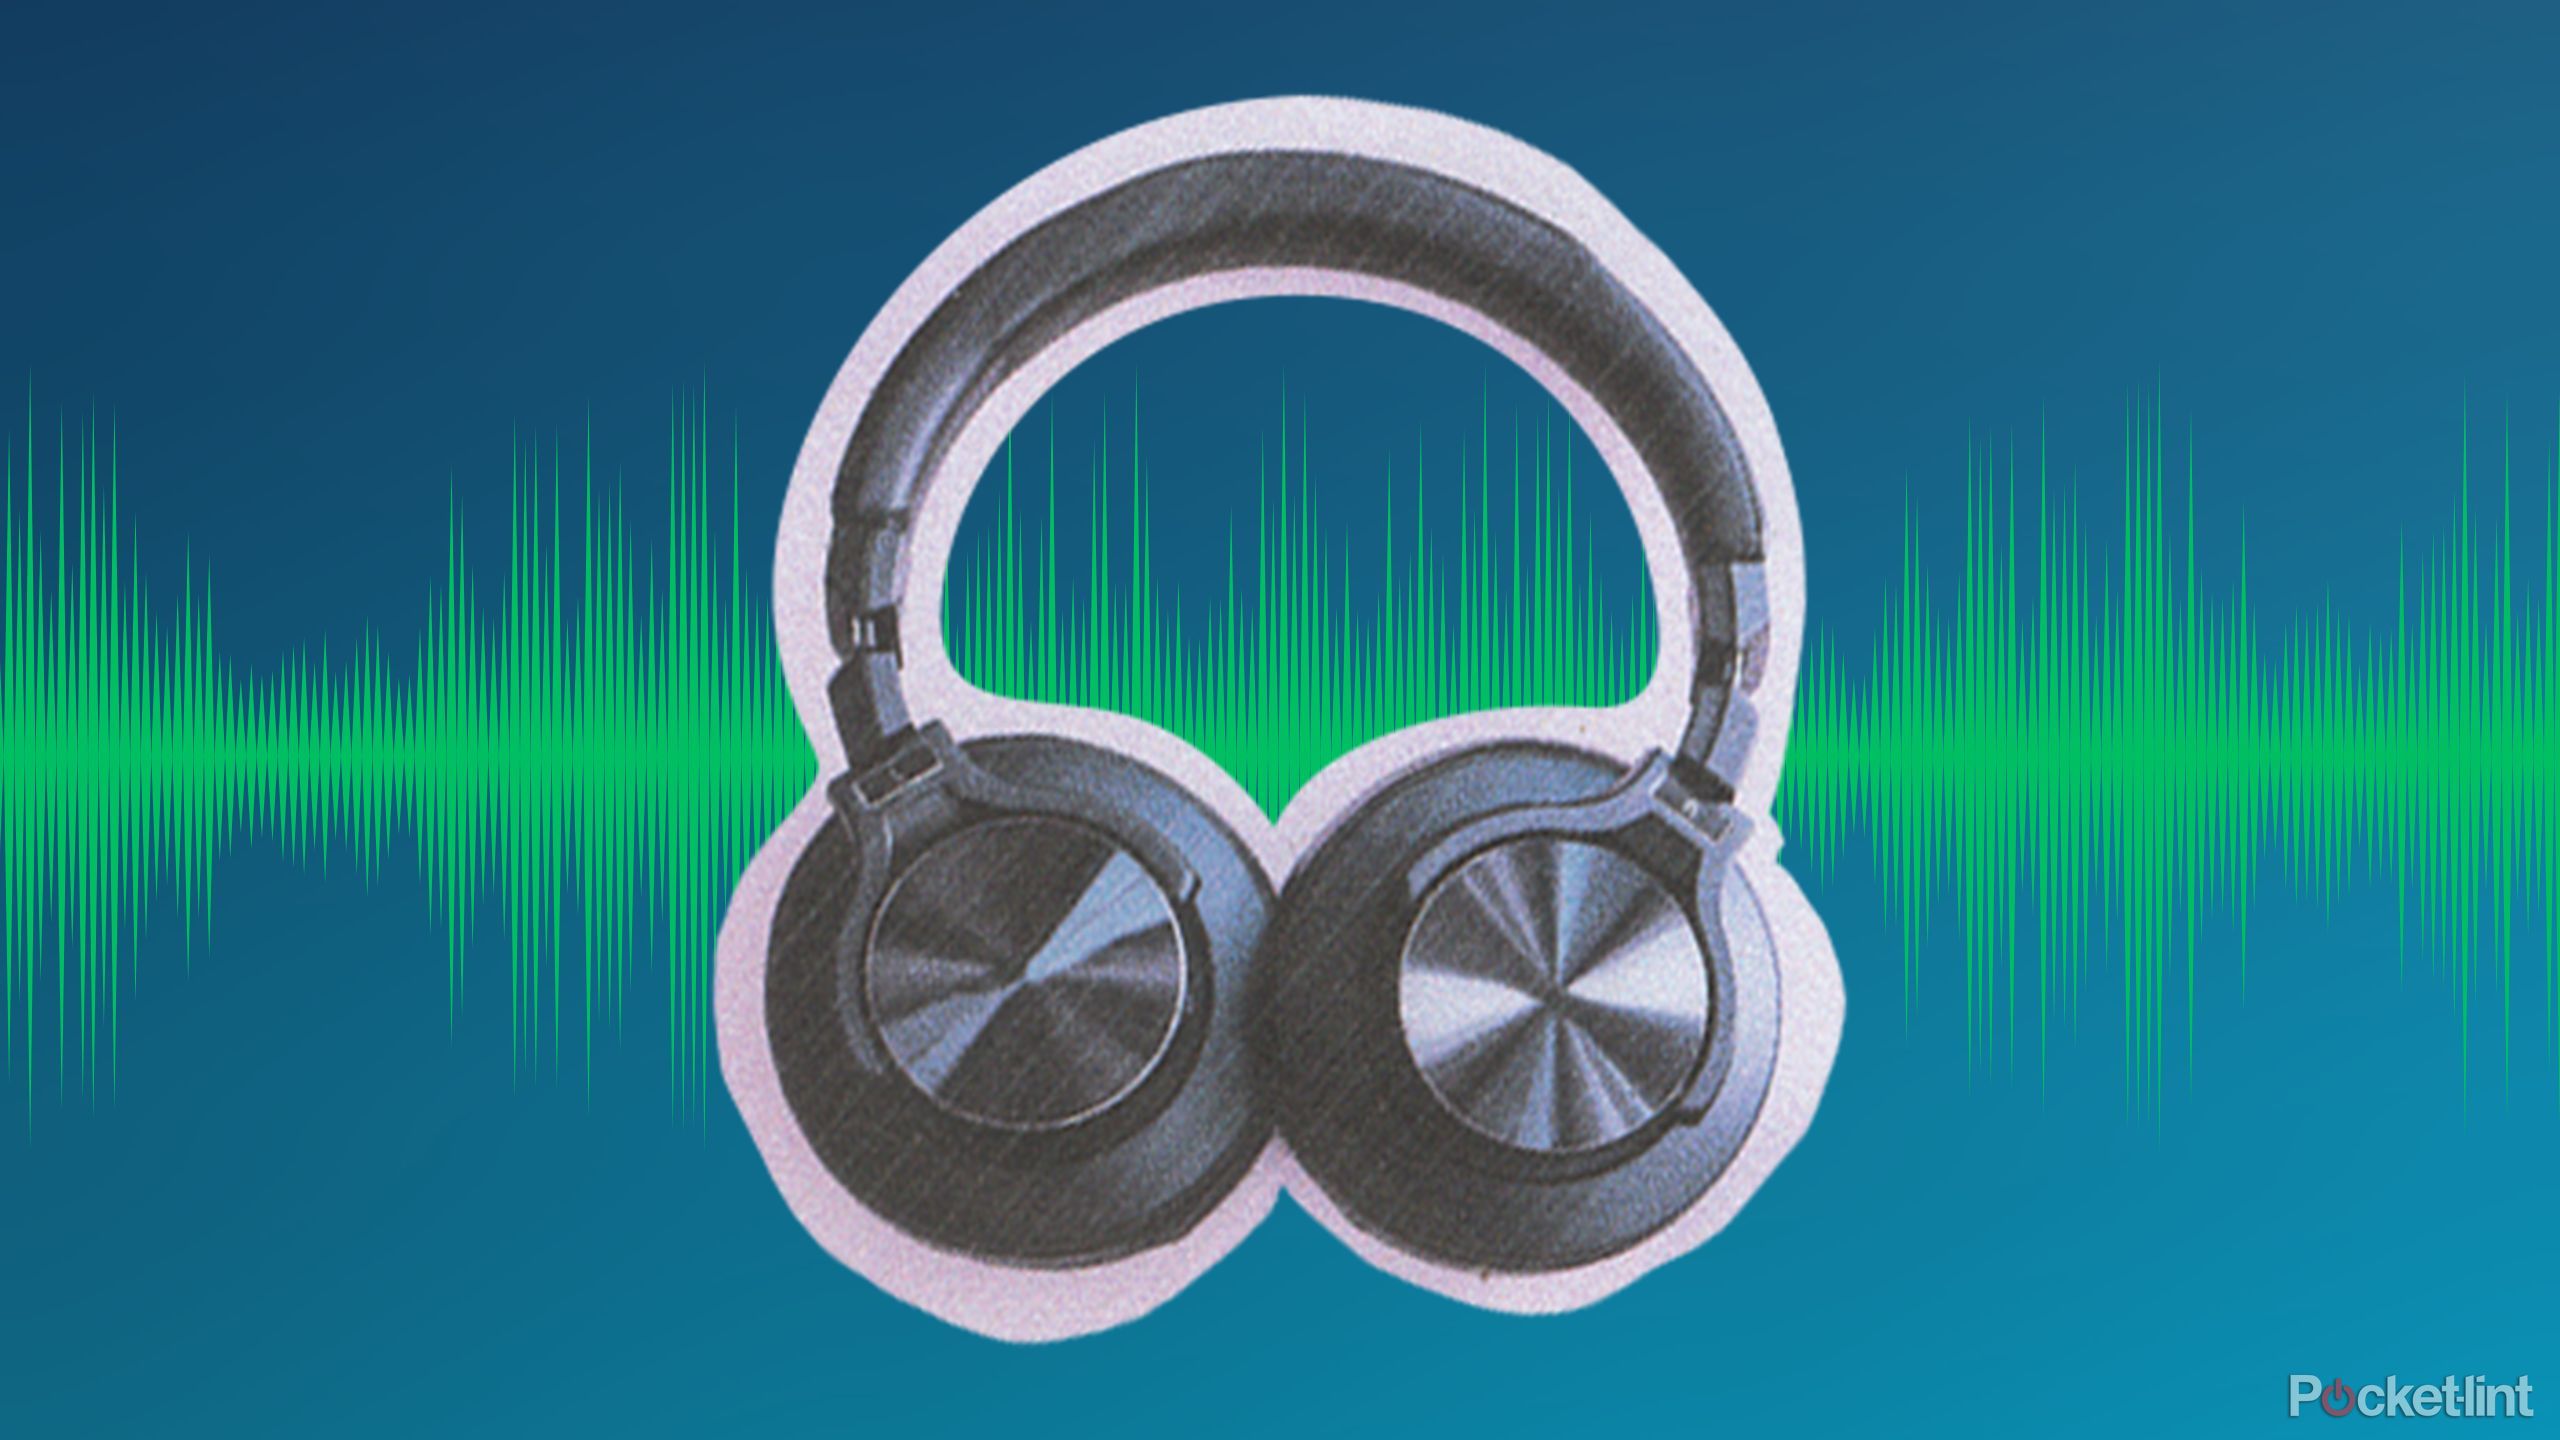 Spotify out of a music funk feature image headphones over a blue background with green soundwaves